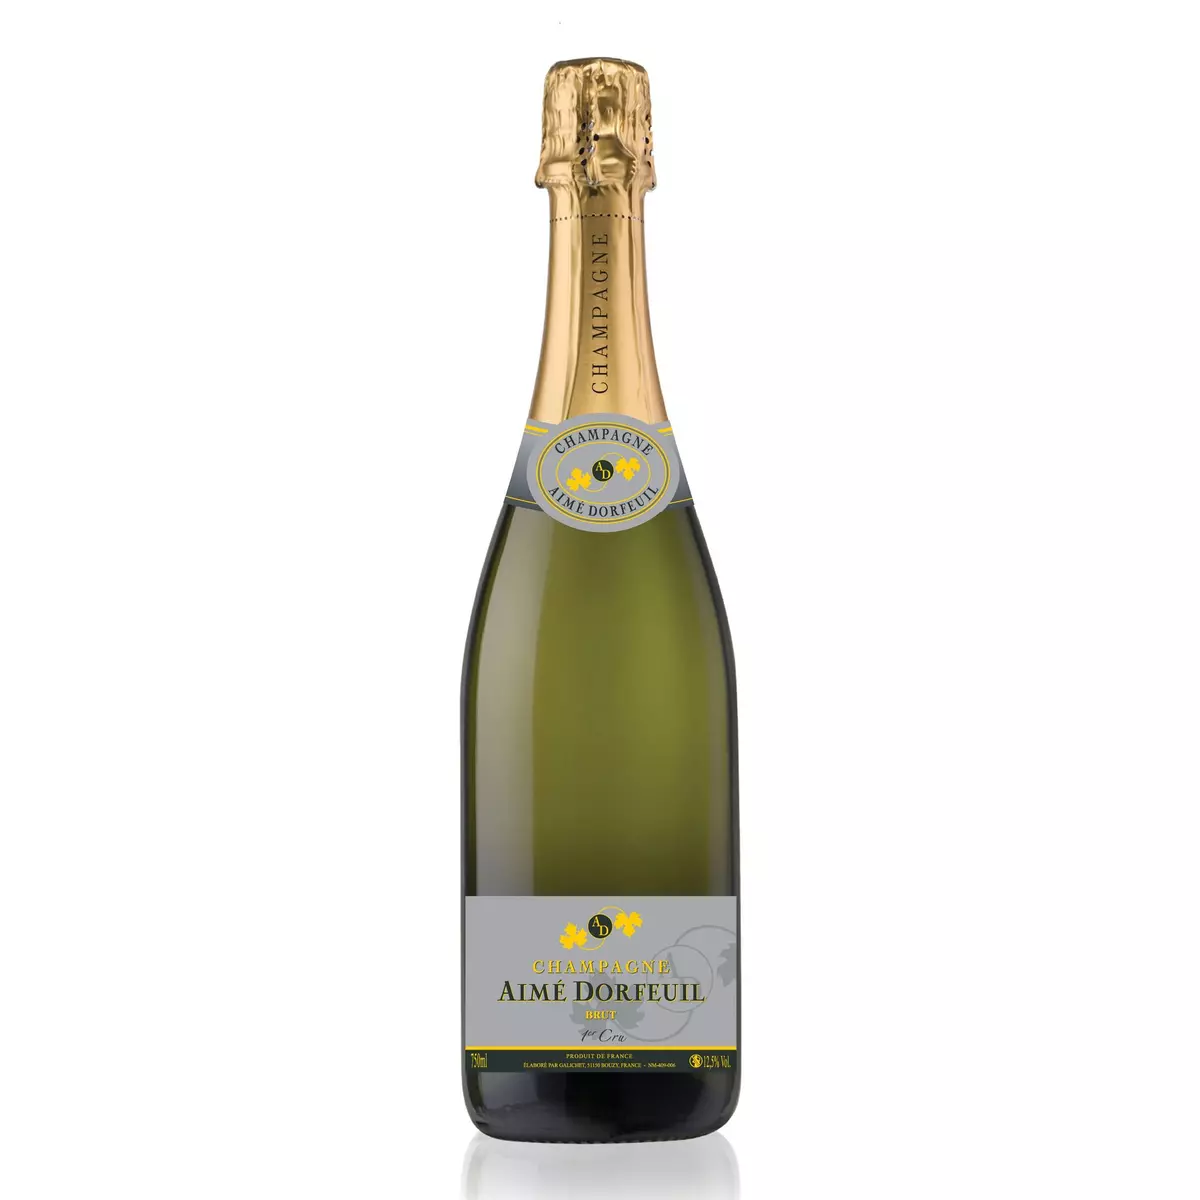 AIME DORFEUIL Champagne brut 75cl